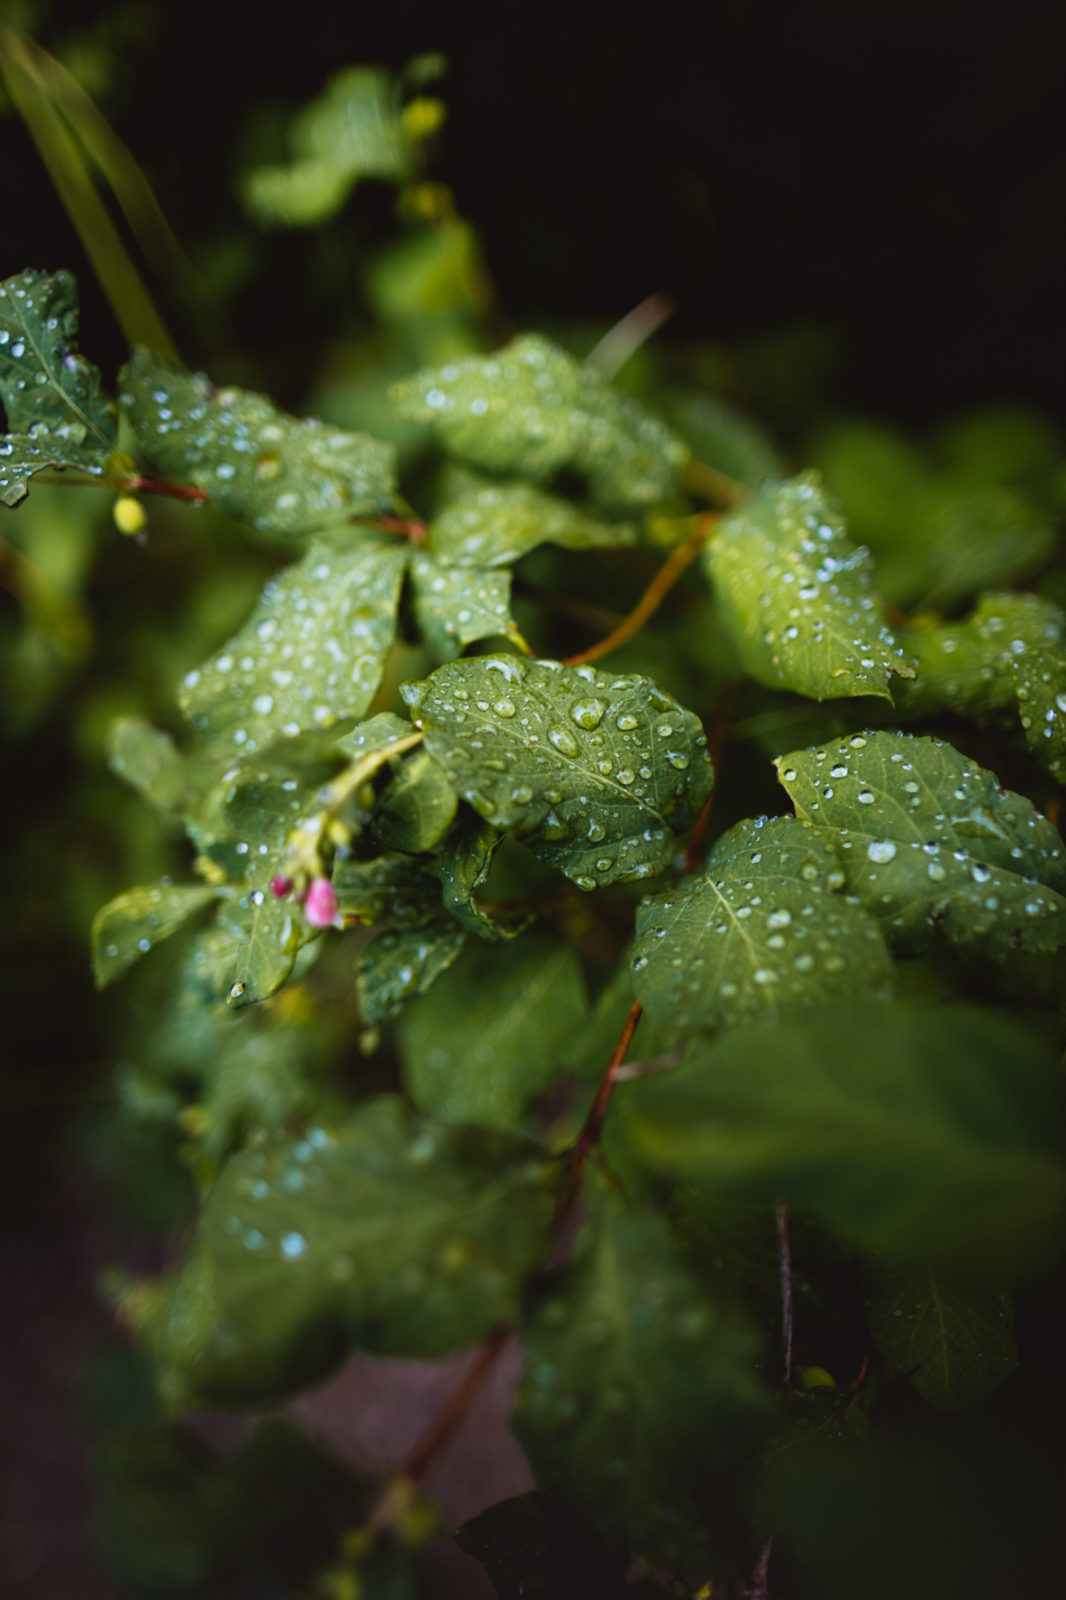 Dewdrops photographed on the vibrant green leaves of a wild rose bush